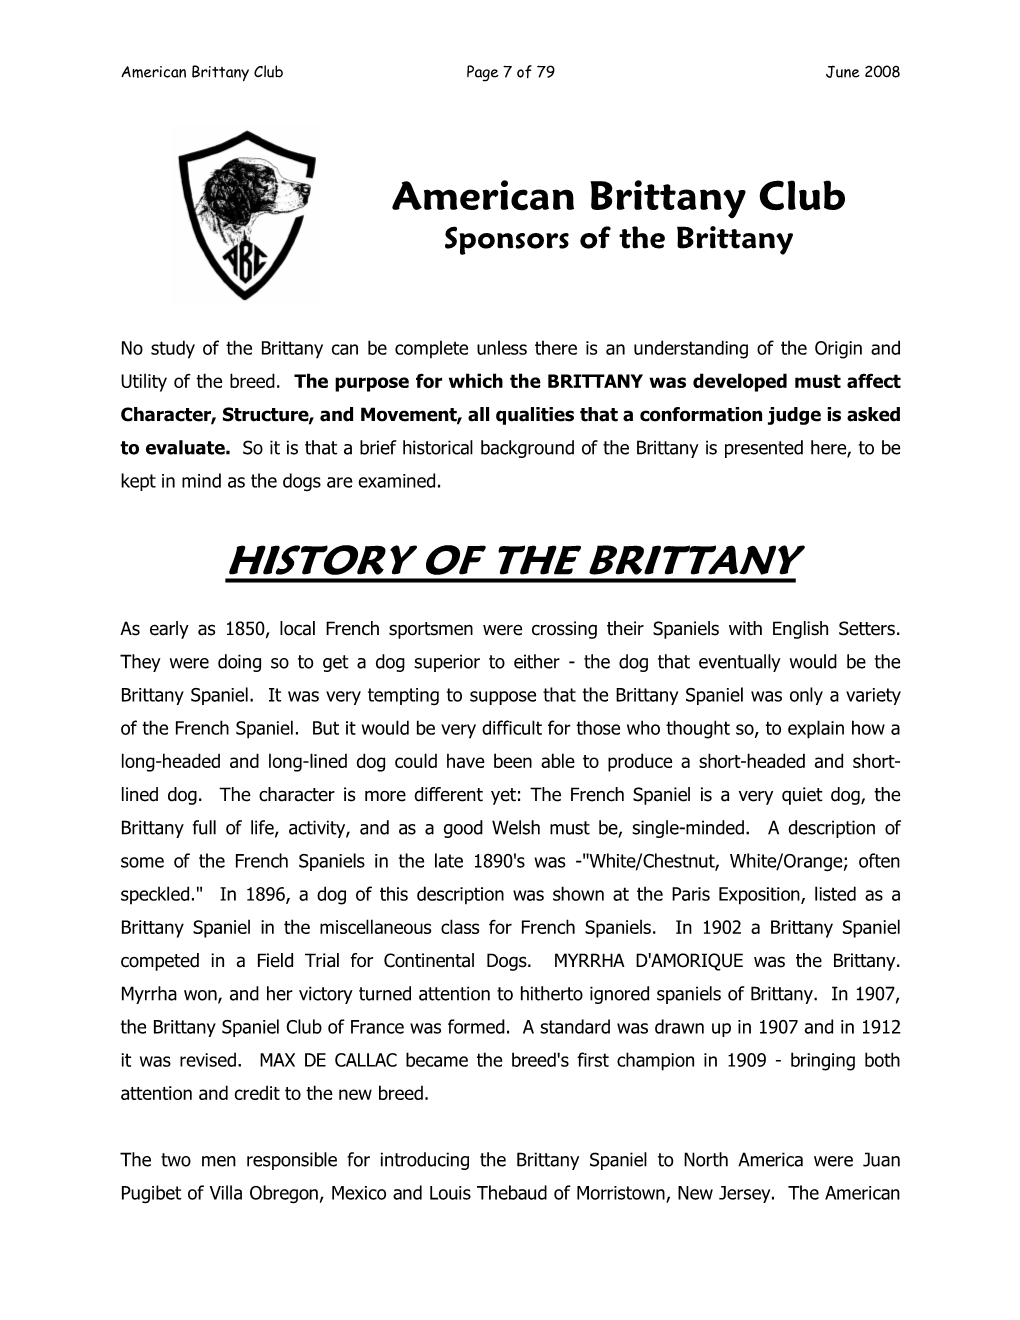 History of the Brittany